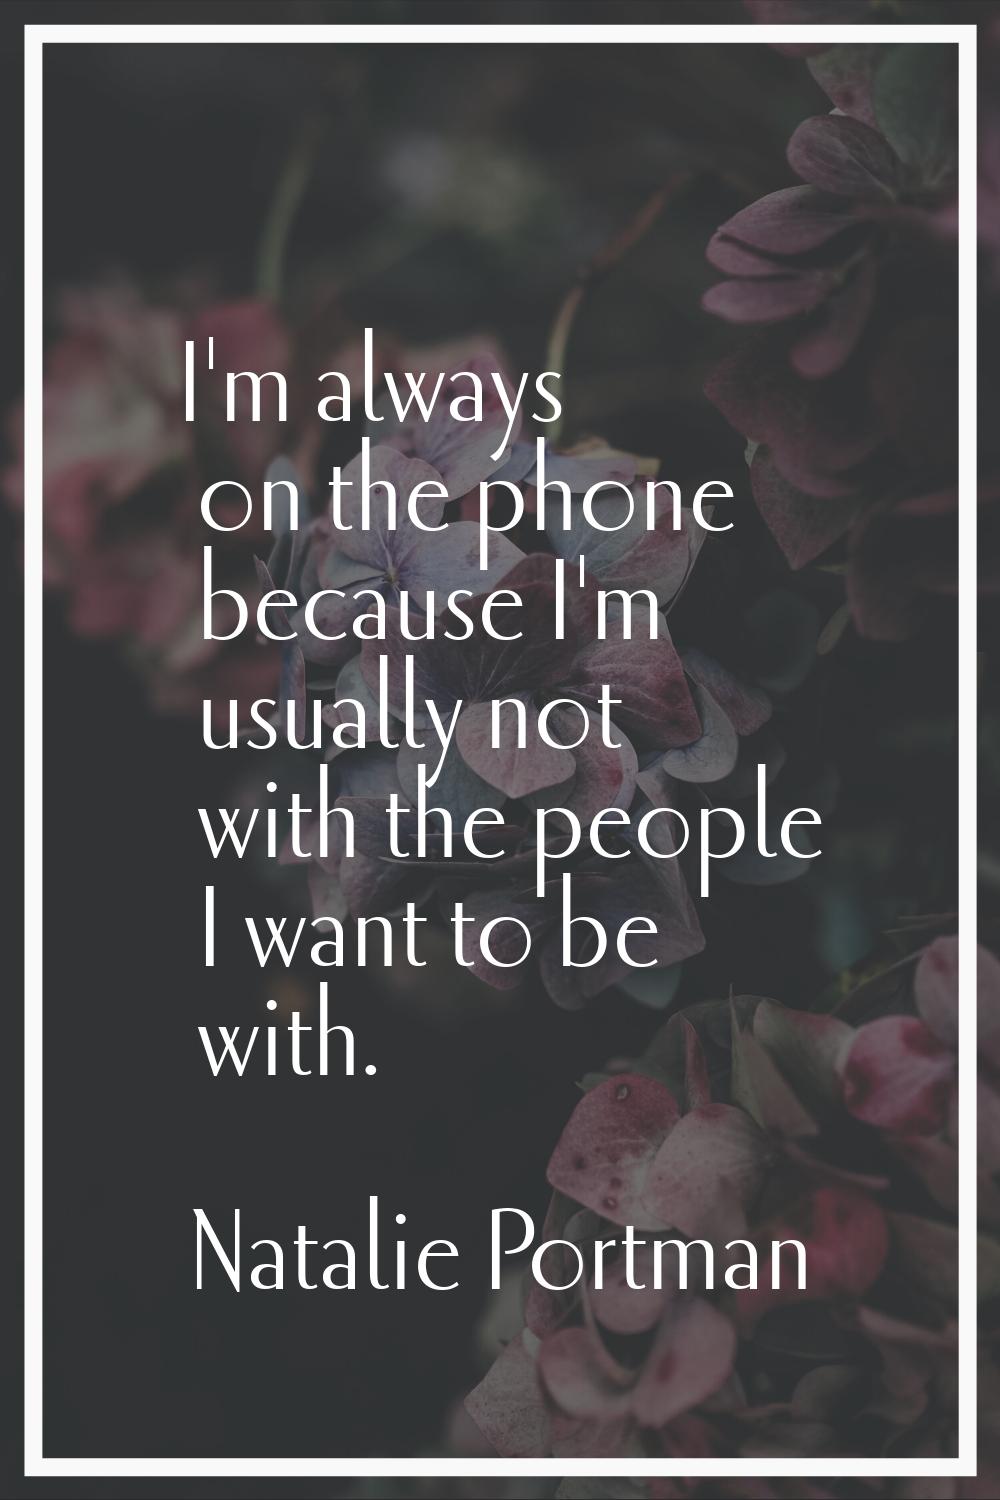 I'm always on the phone because I'm usually not with the people I want to be with.